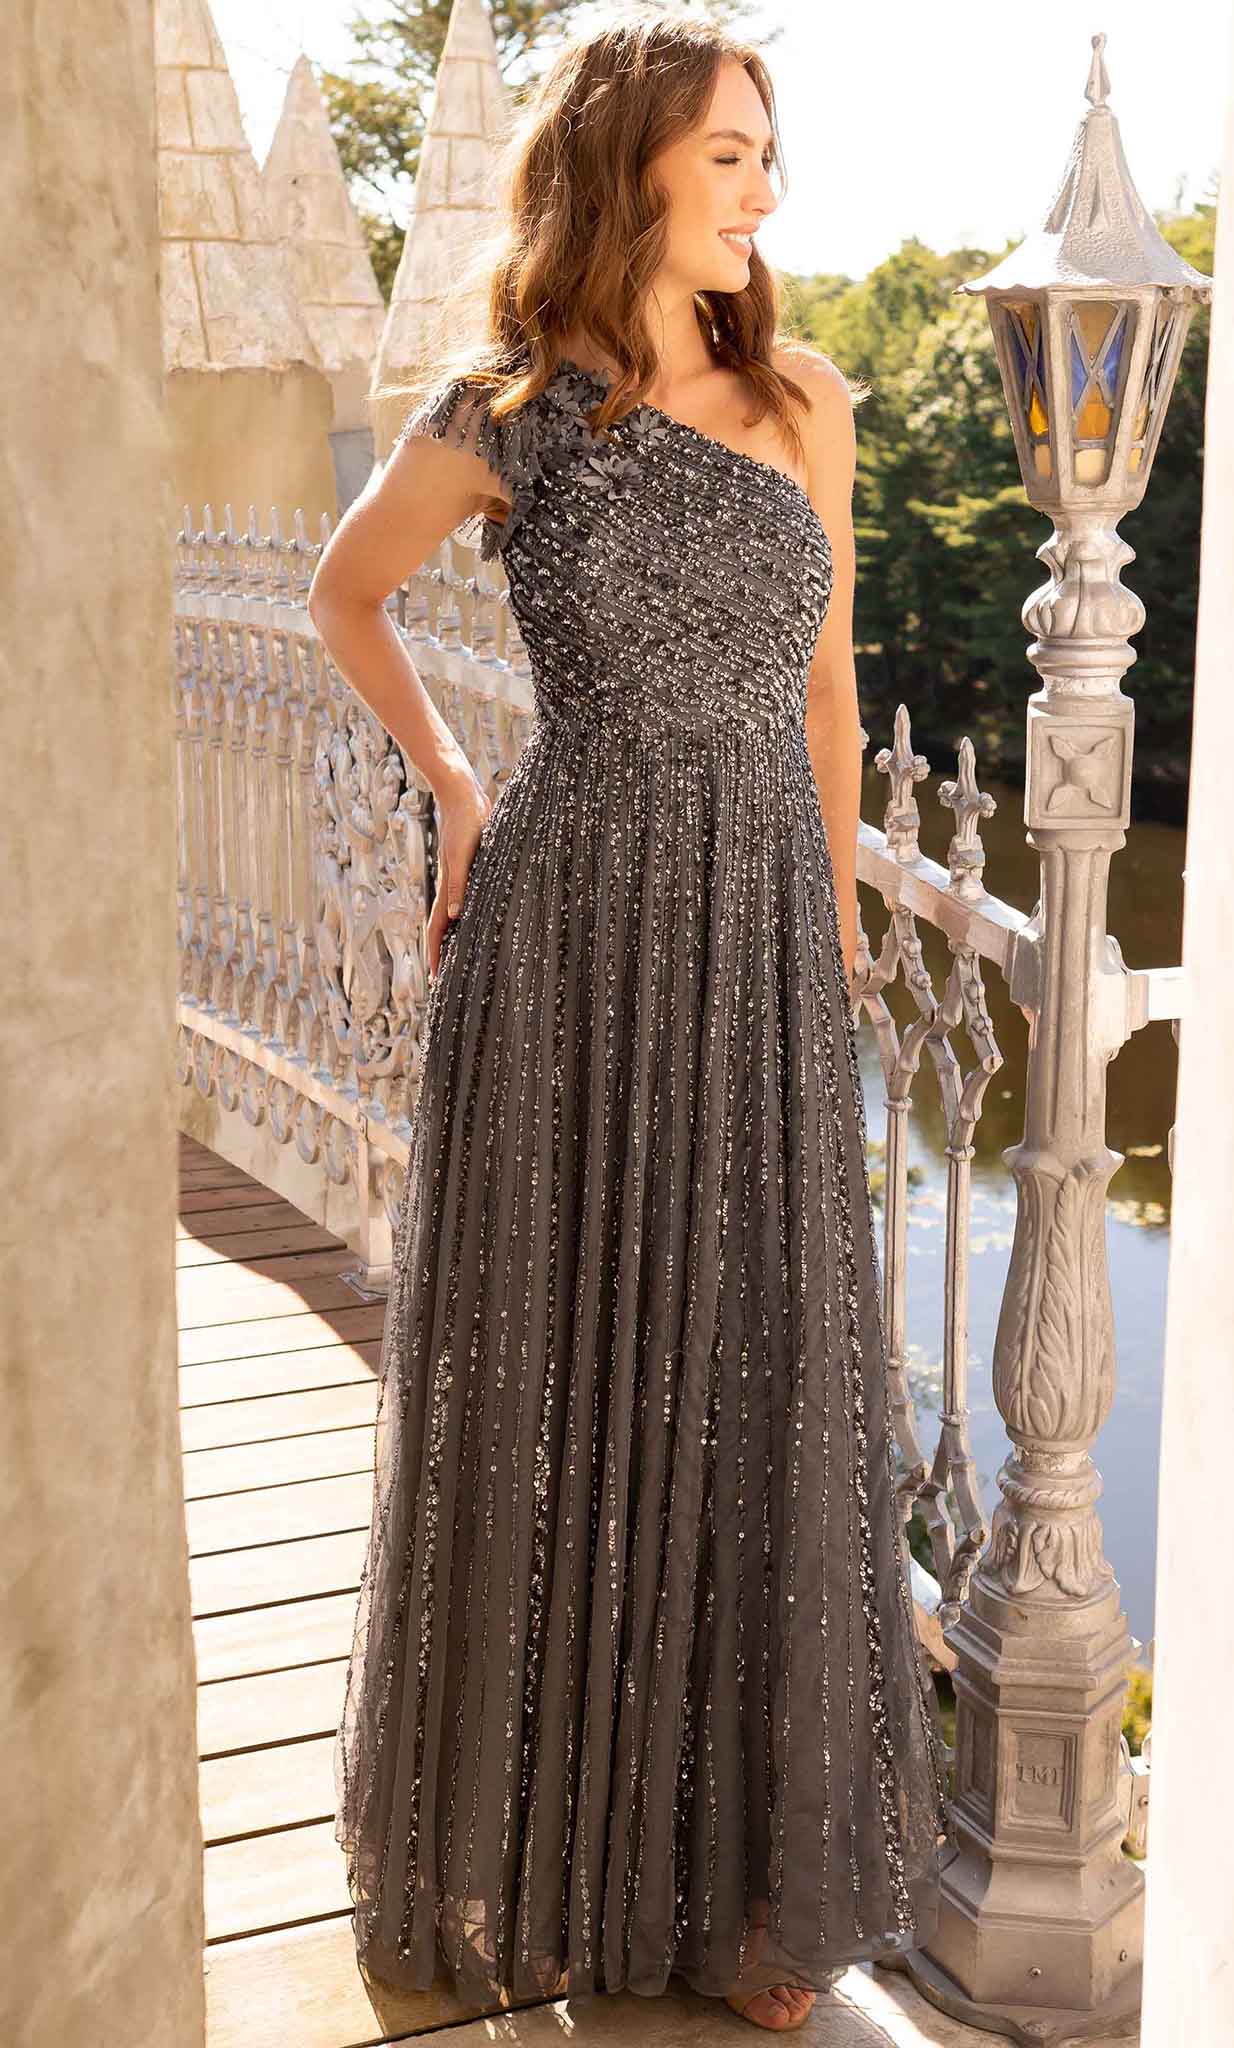 Primavera Couture 12003 - Flowy Sequined One Shoulder Dress Prom Dresses 4 / Charcoal